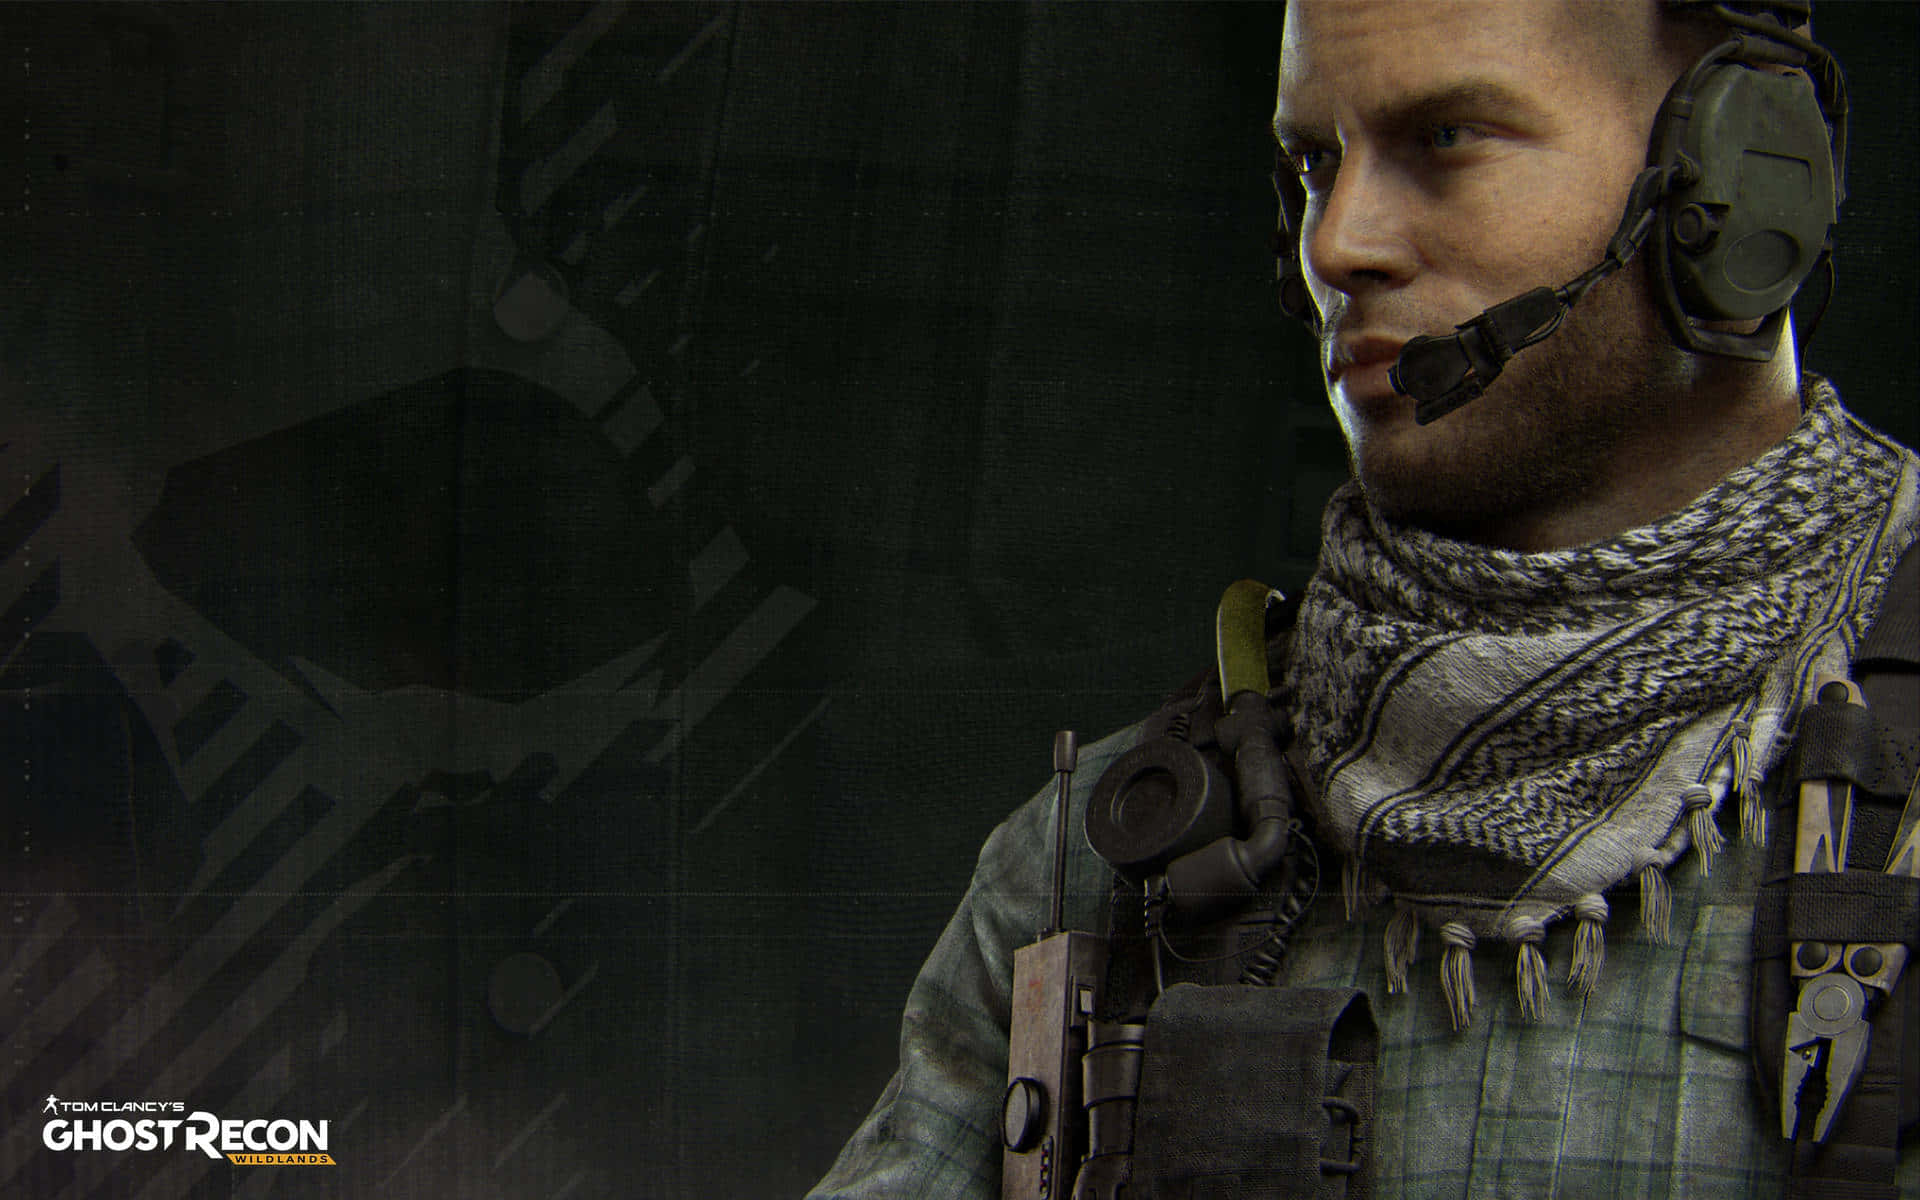 Holt Character In Ghost Recon Wildlands Background 1920 x 1200 Background